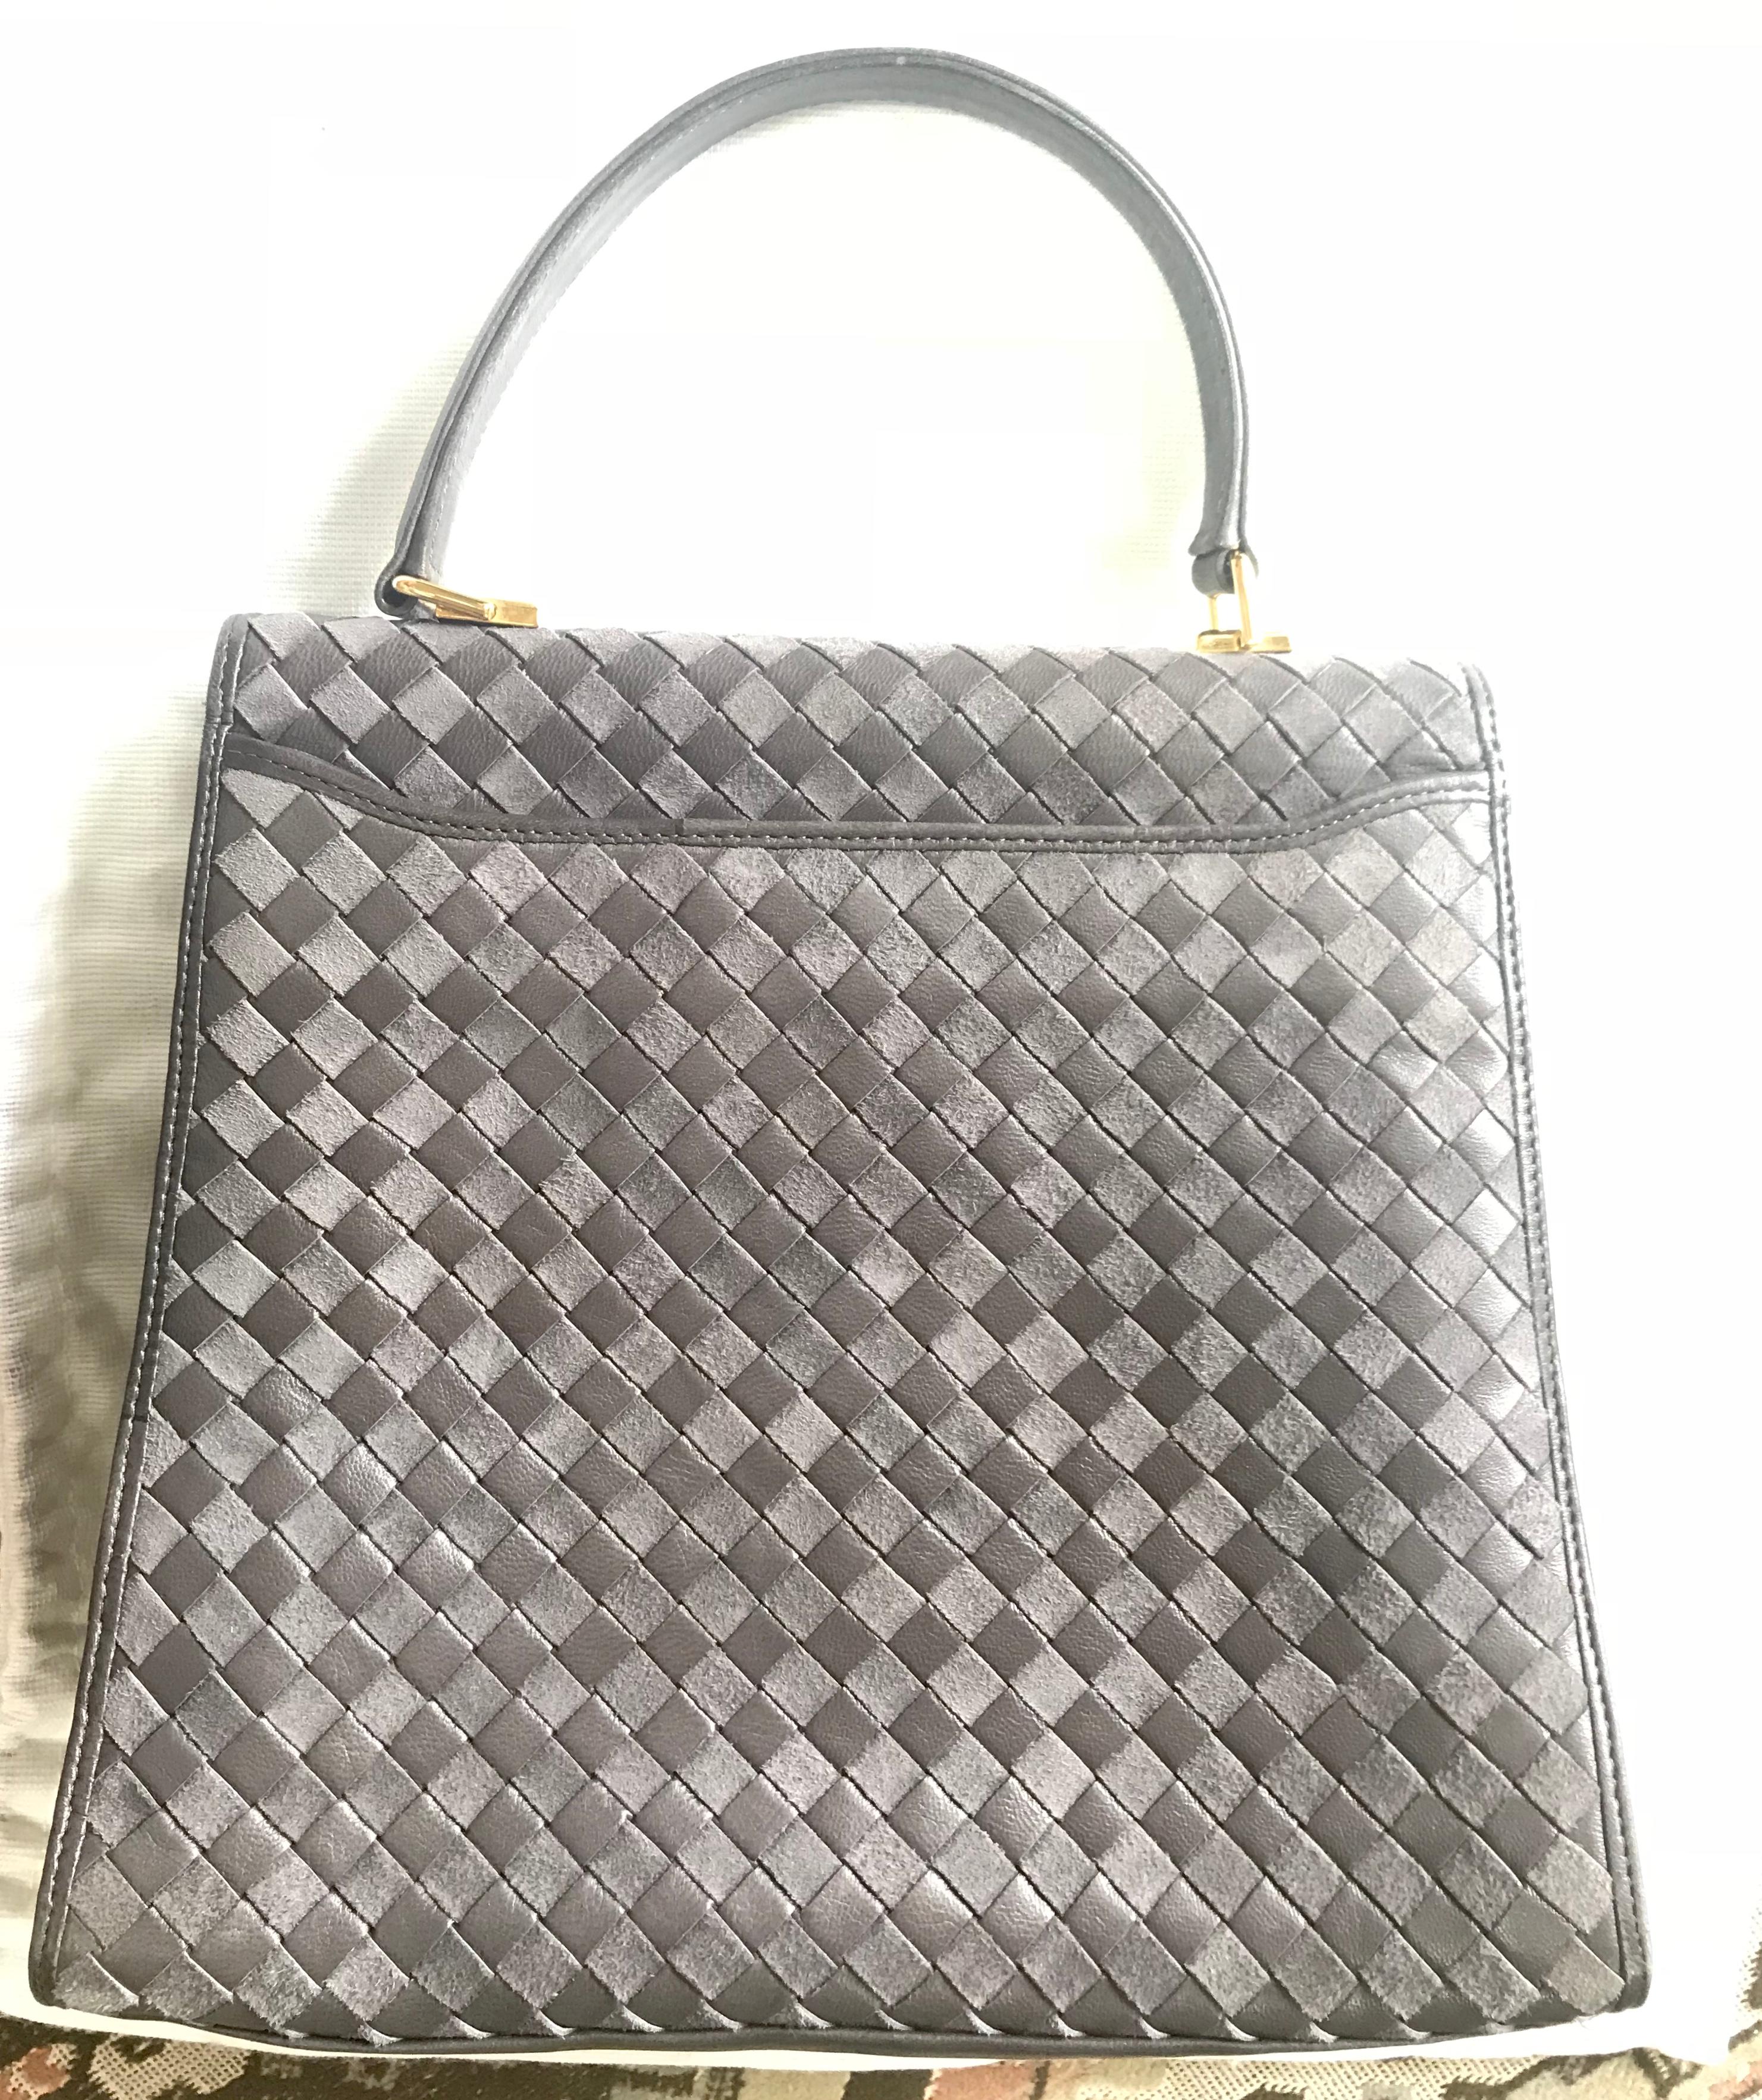 Women's Vintage Bally taupe grey intrecciato leather kelly handbag with gold tone logo. For Sale